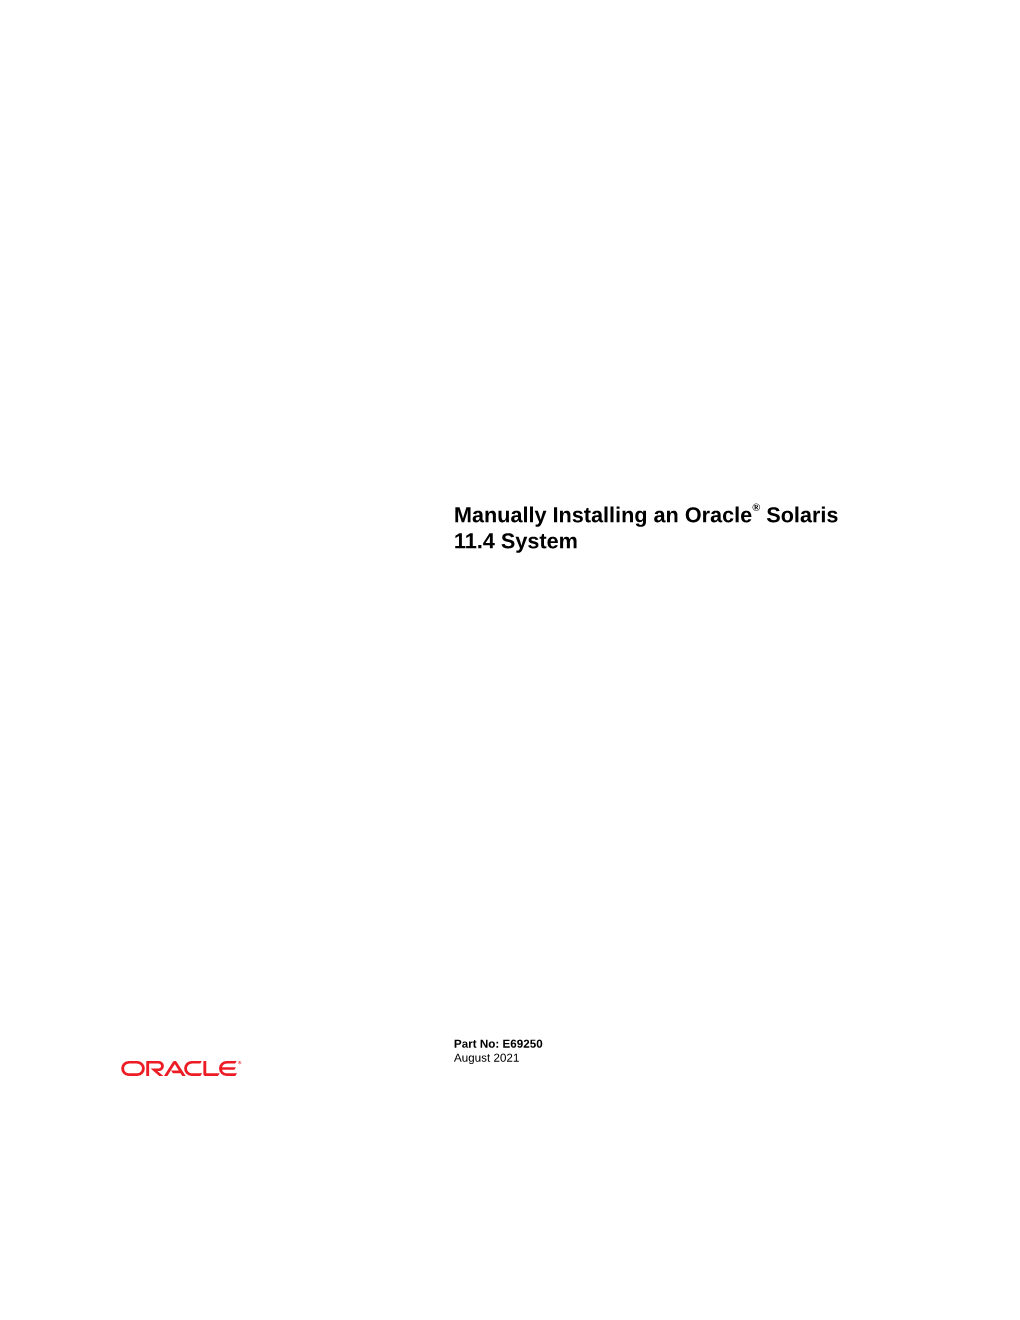 Manually Installing an Oracle® Solaris 11.4 System